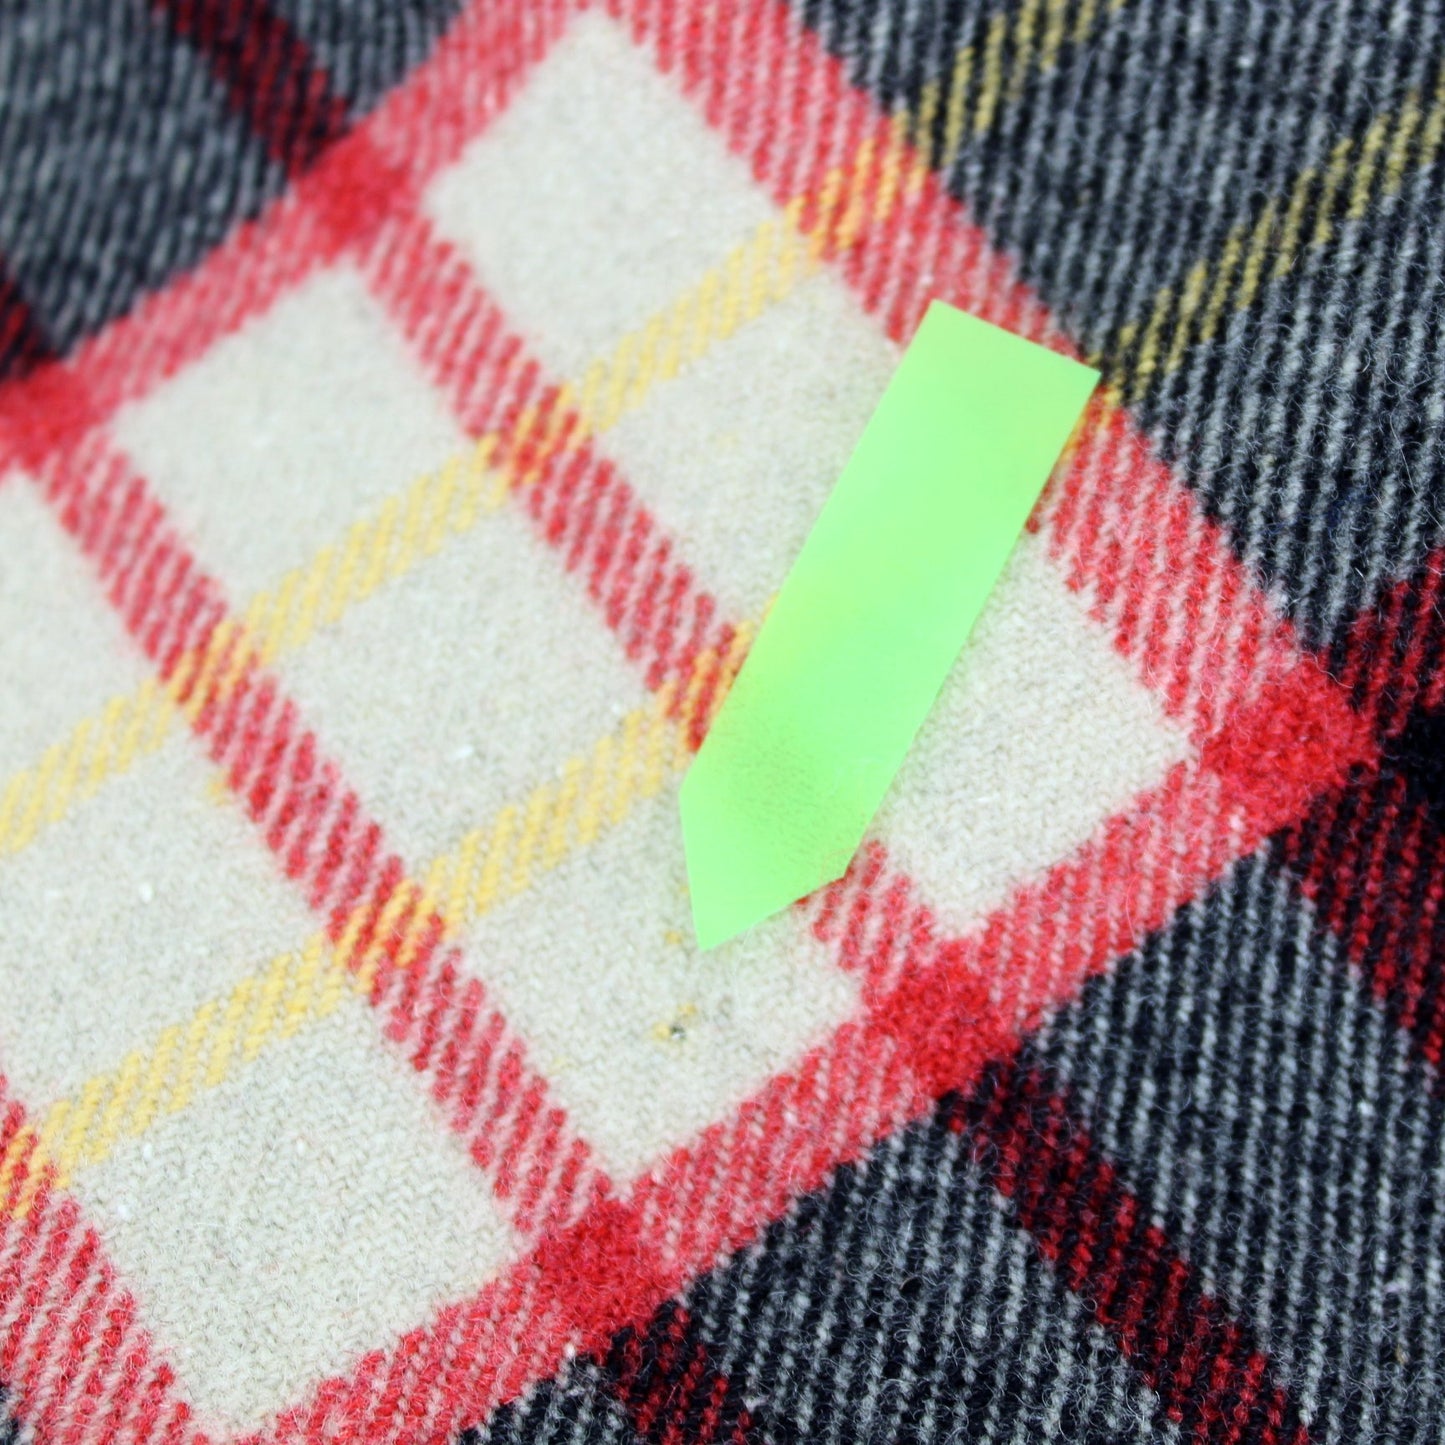 "Mister" Fringed Estate Throw Blanket Plaid Cream Red Back Yellow Fine Wool photo tiny flaw